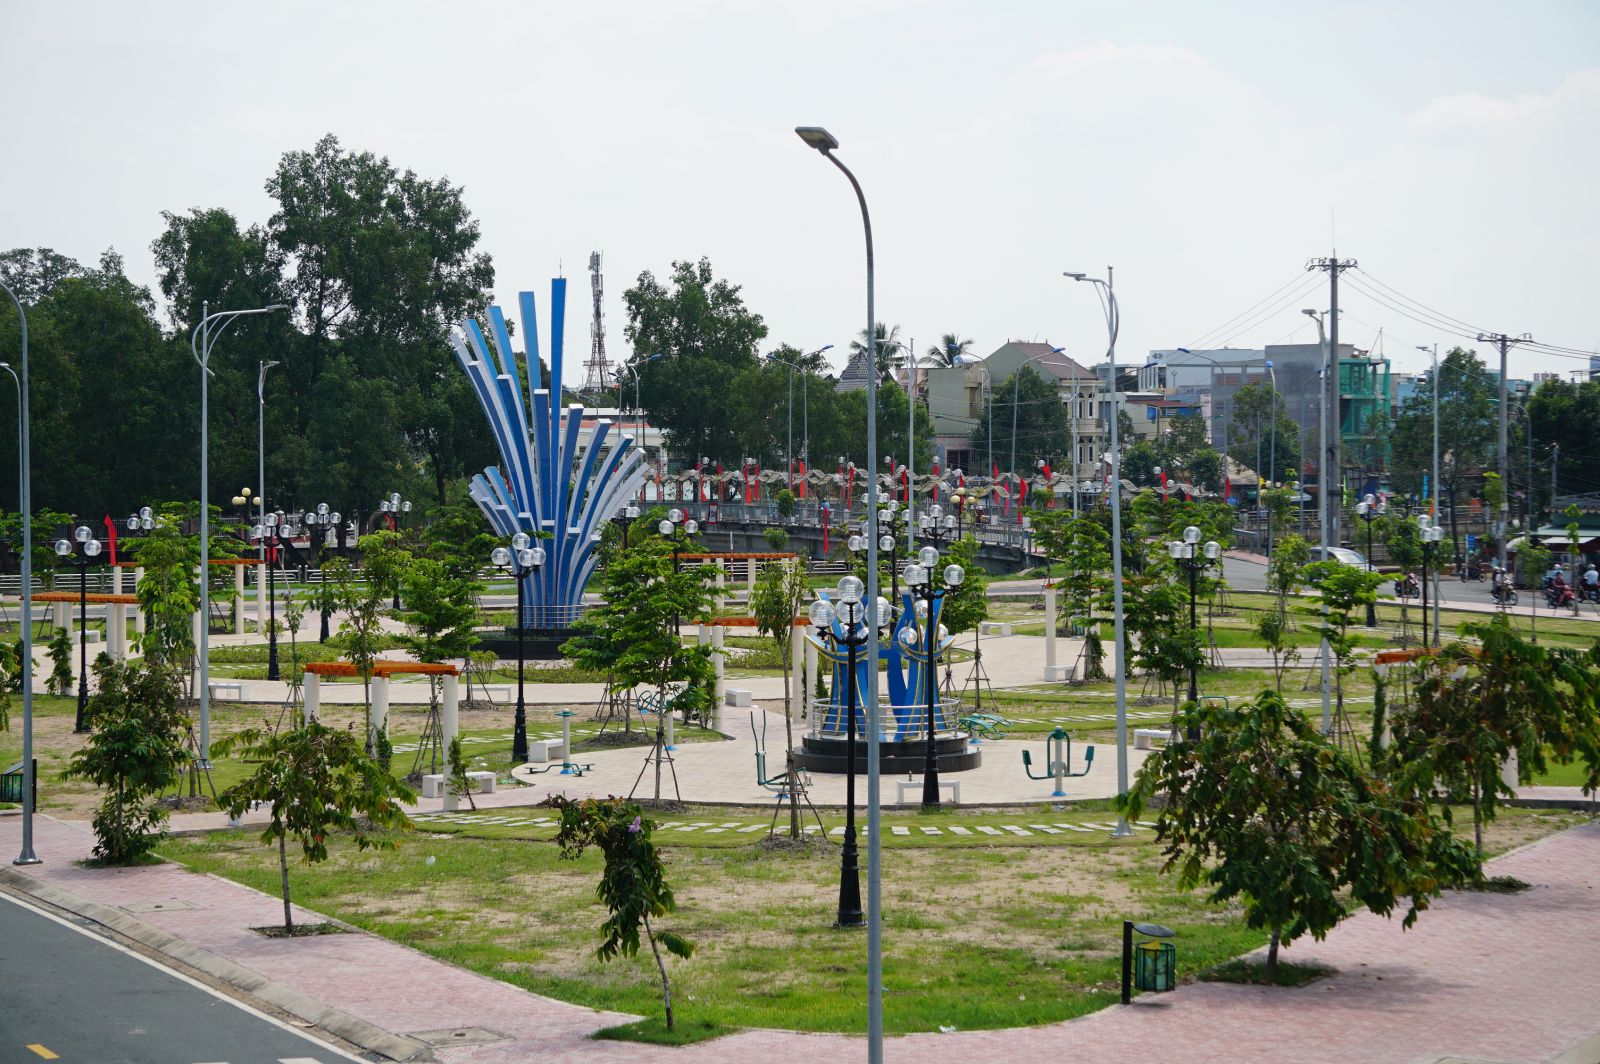 The key project in the term 2020-2025 is to complete Park 2 phase 2